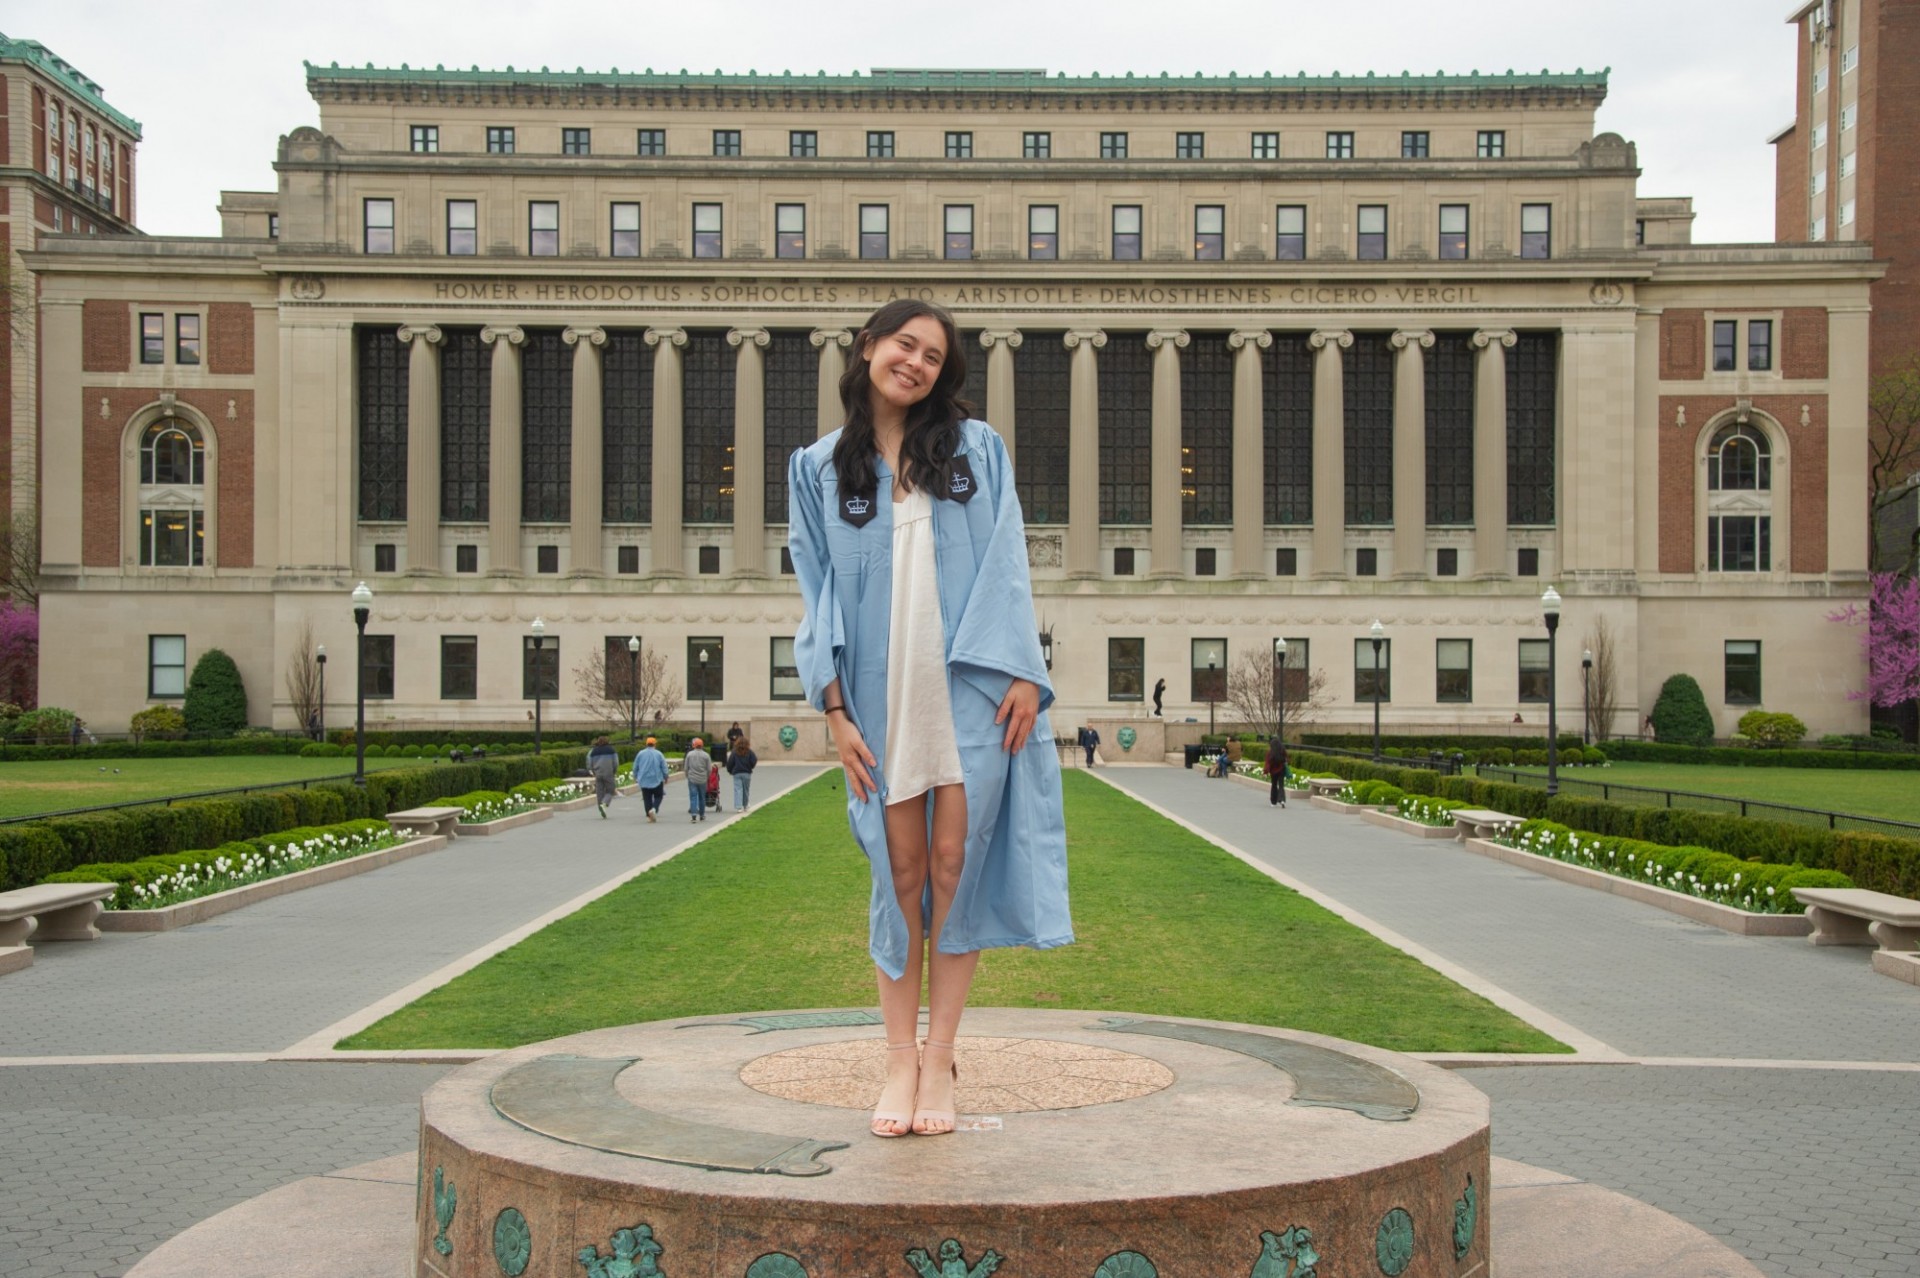 Maya standing on the sundial in graduation gown